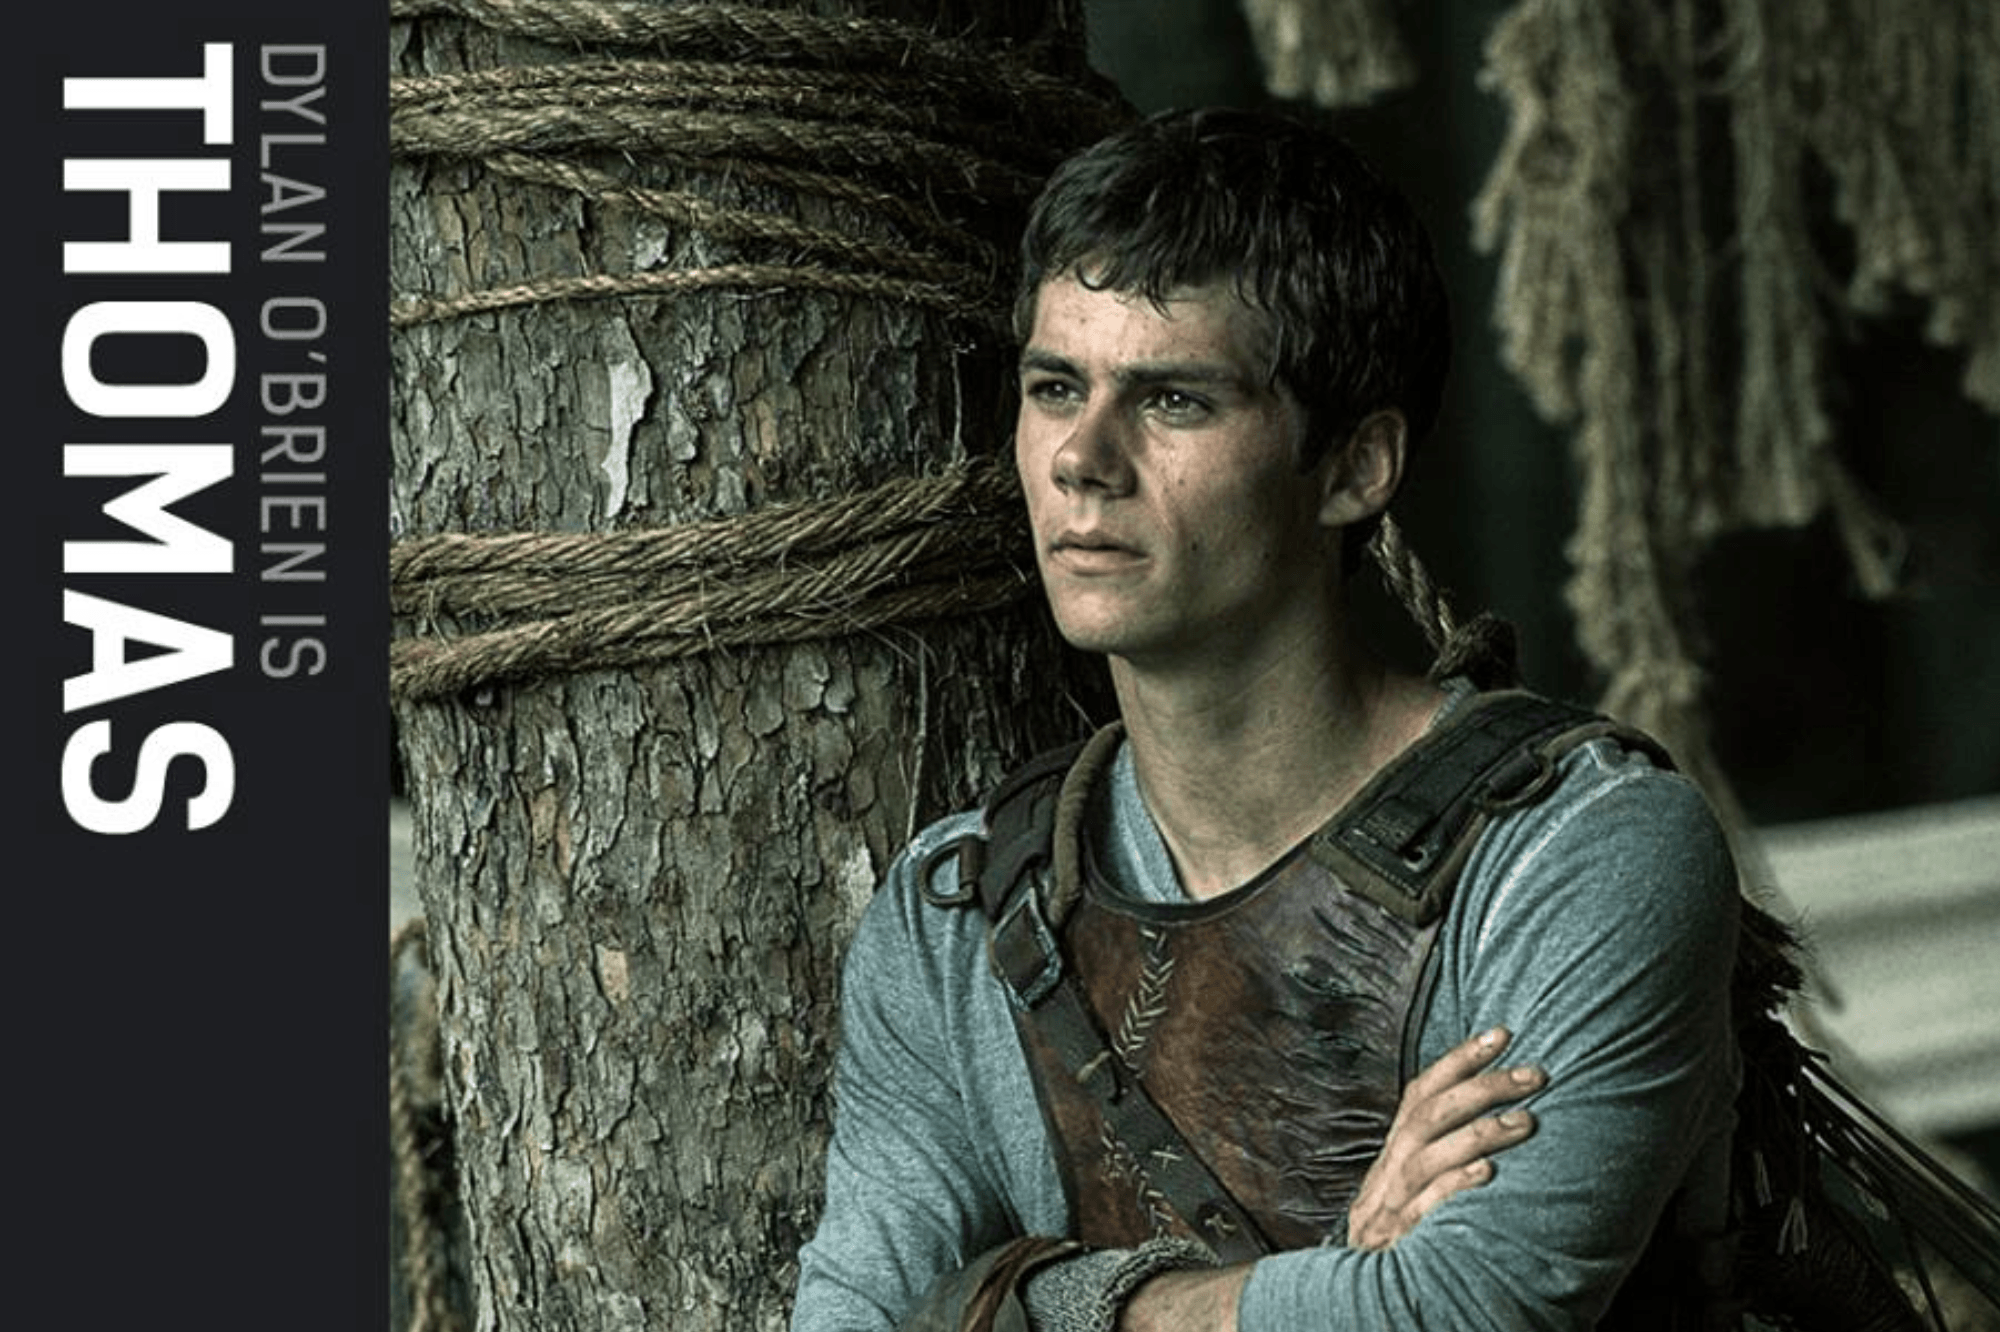 The Maze Runner participant of the game wallpapers and image.